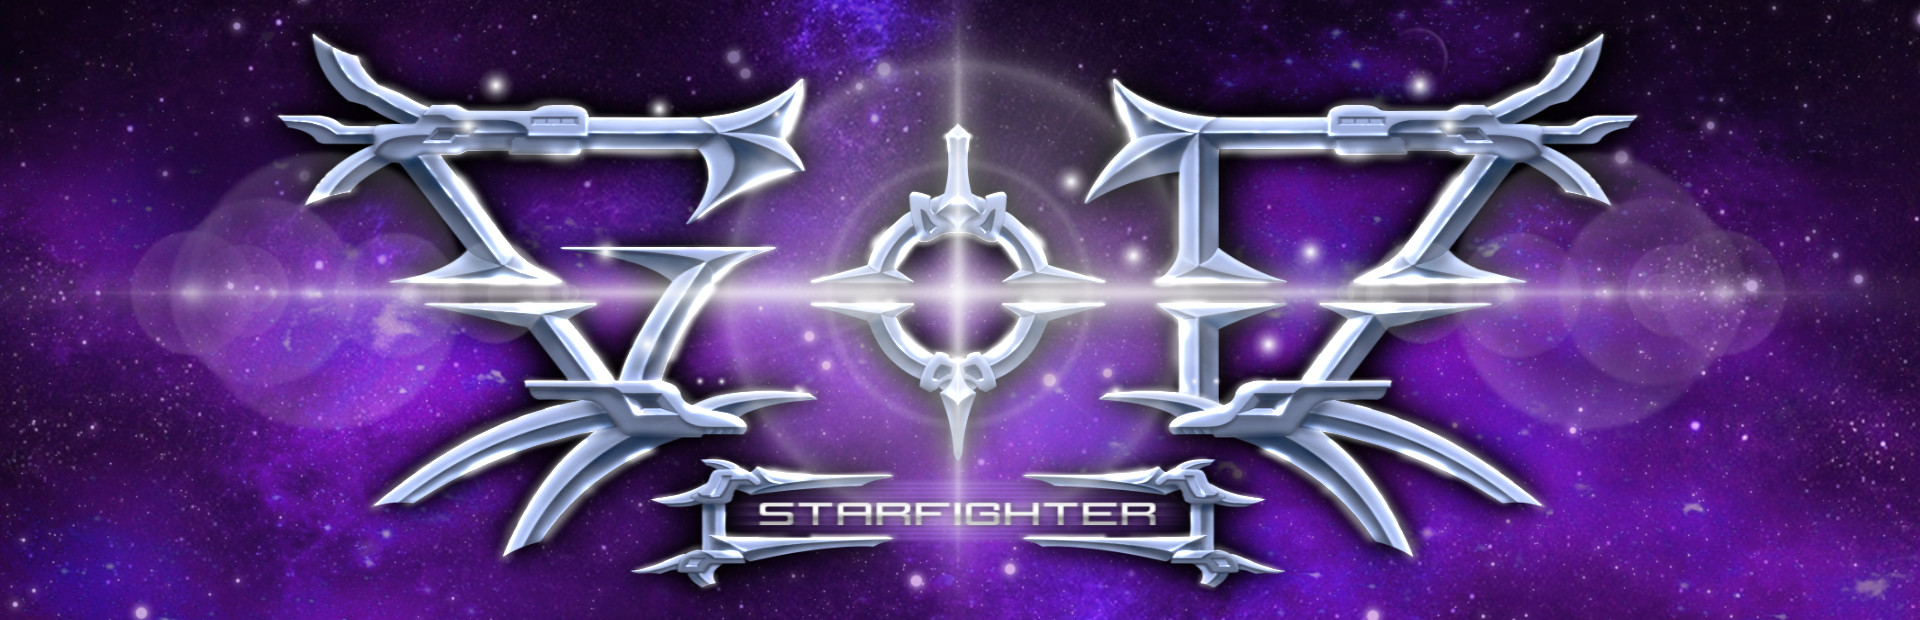 GOD STARFIGHTER cover image